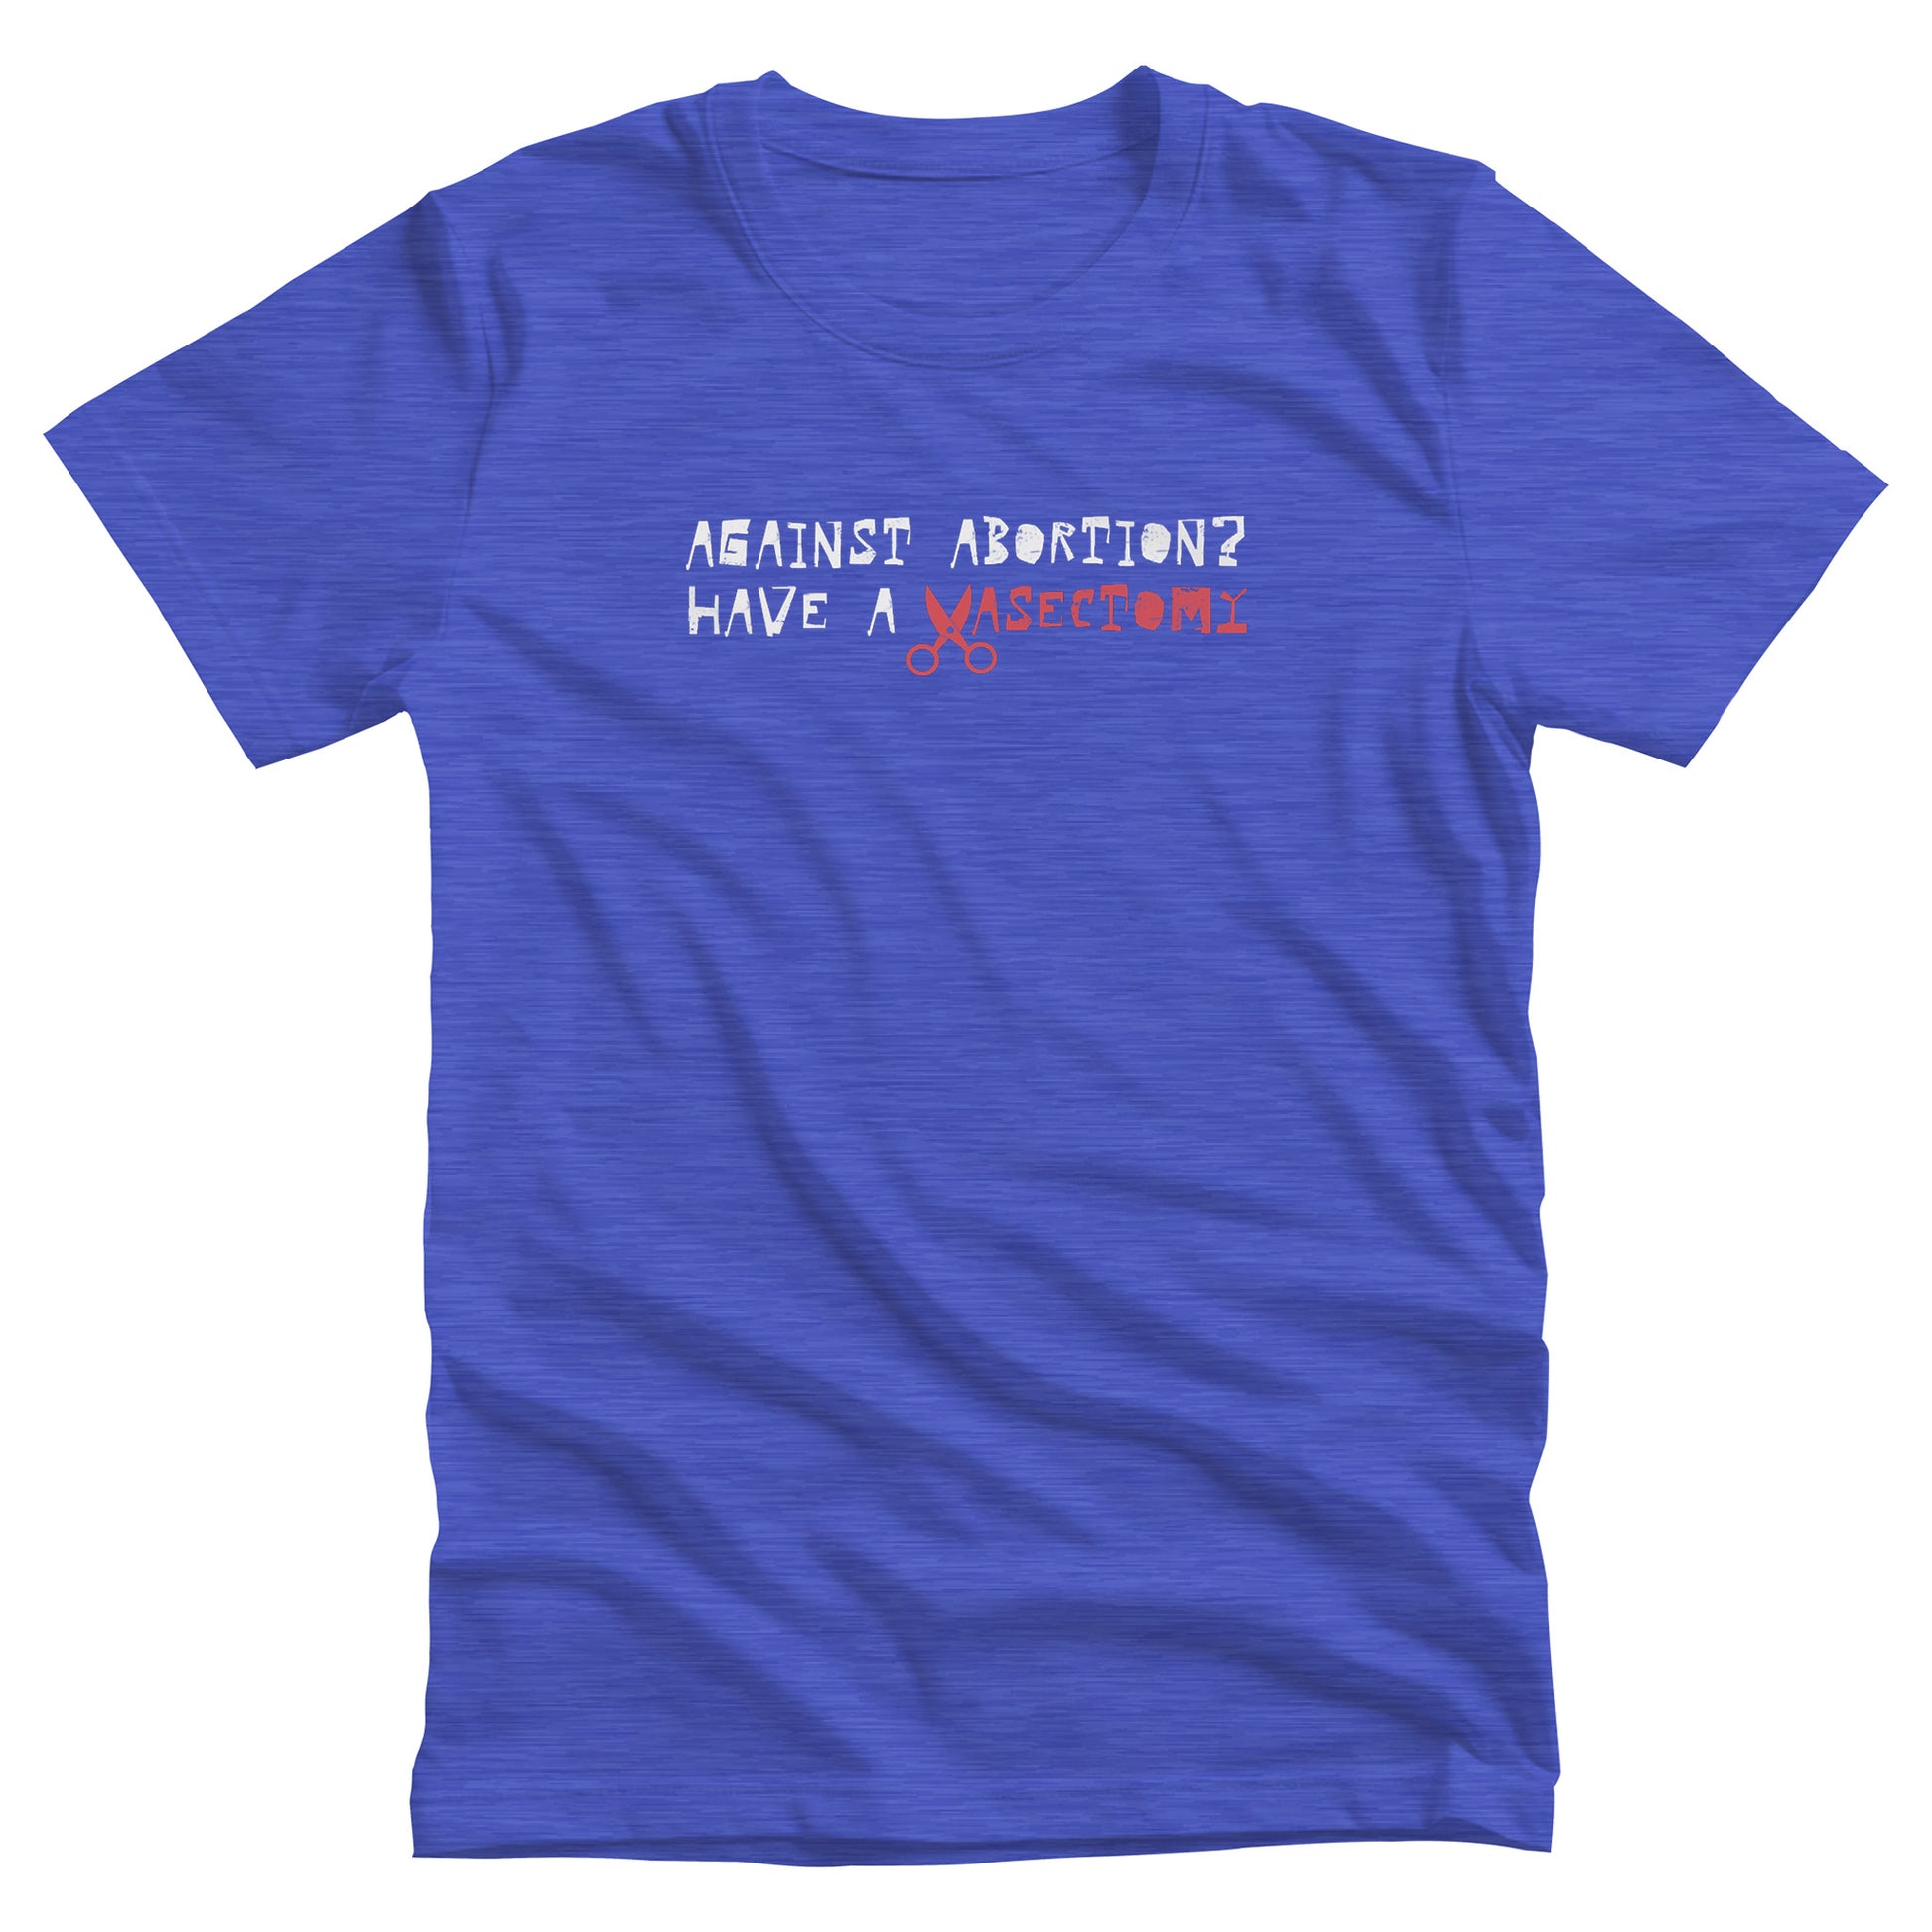 Heather True Royal color unisex t-shirt that says, “Against Abortion? Have a Vasectomy” in all caps. The word “Vasectomy” is red and the “V” is scissors.